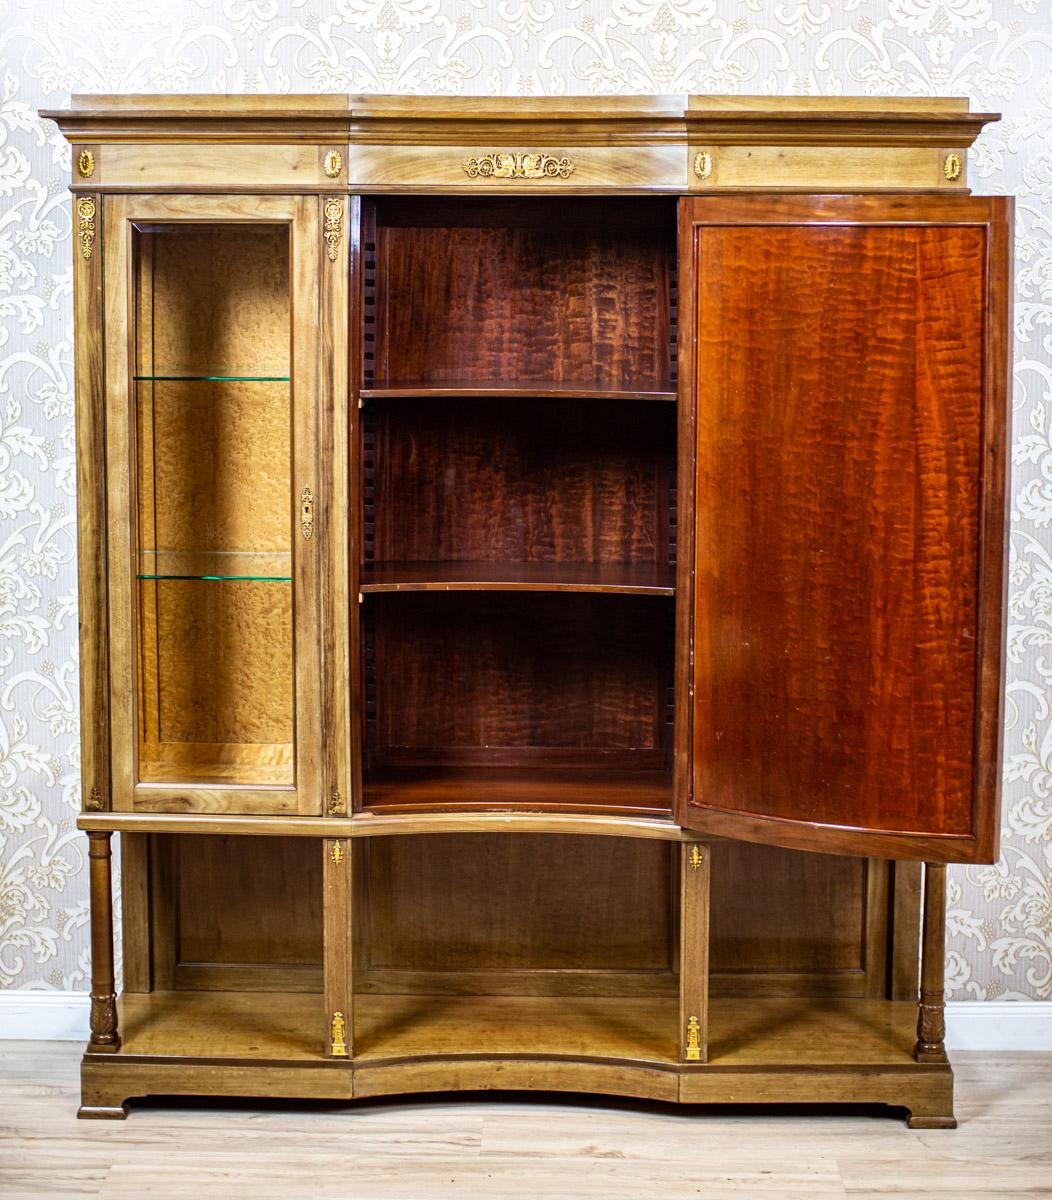 European Early 20th-Century Bookcase in the Empire Type with Brass Appliques For Sale